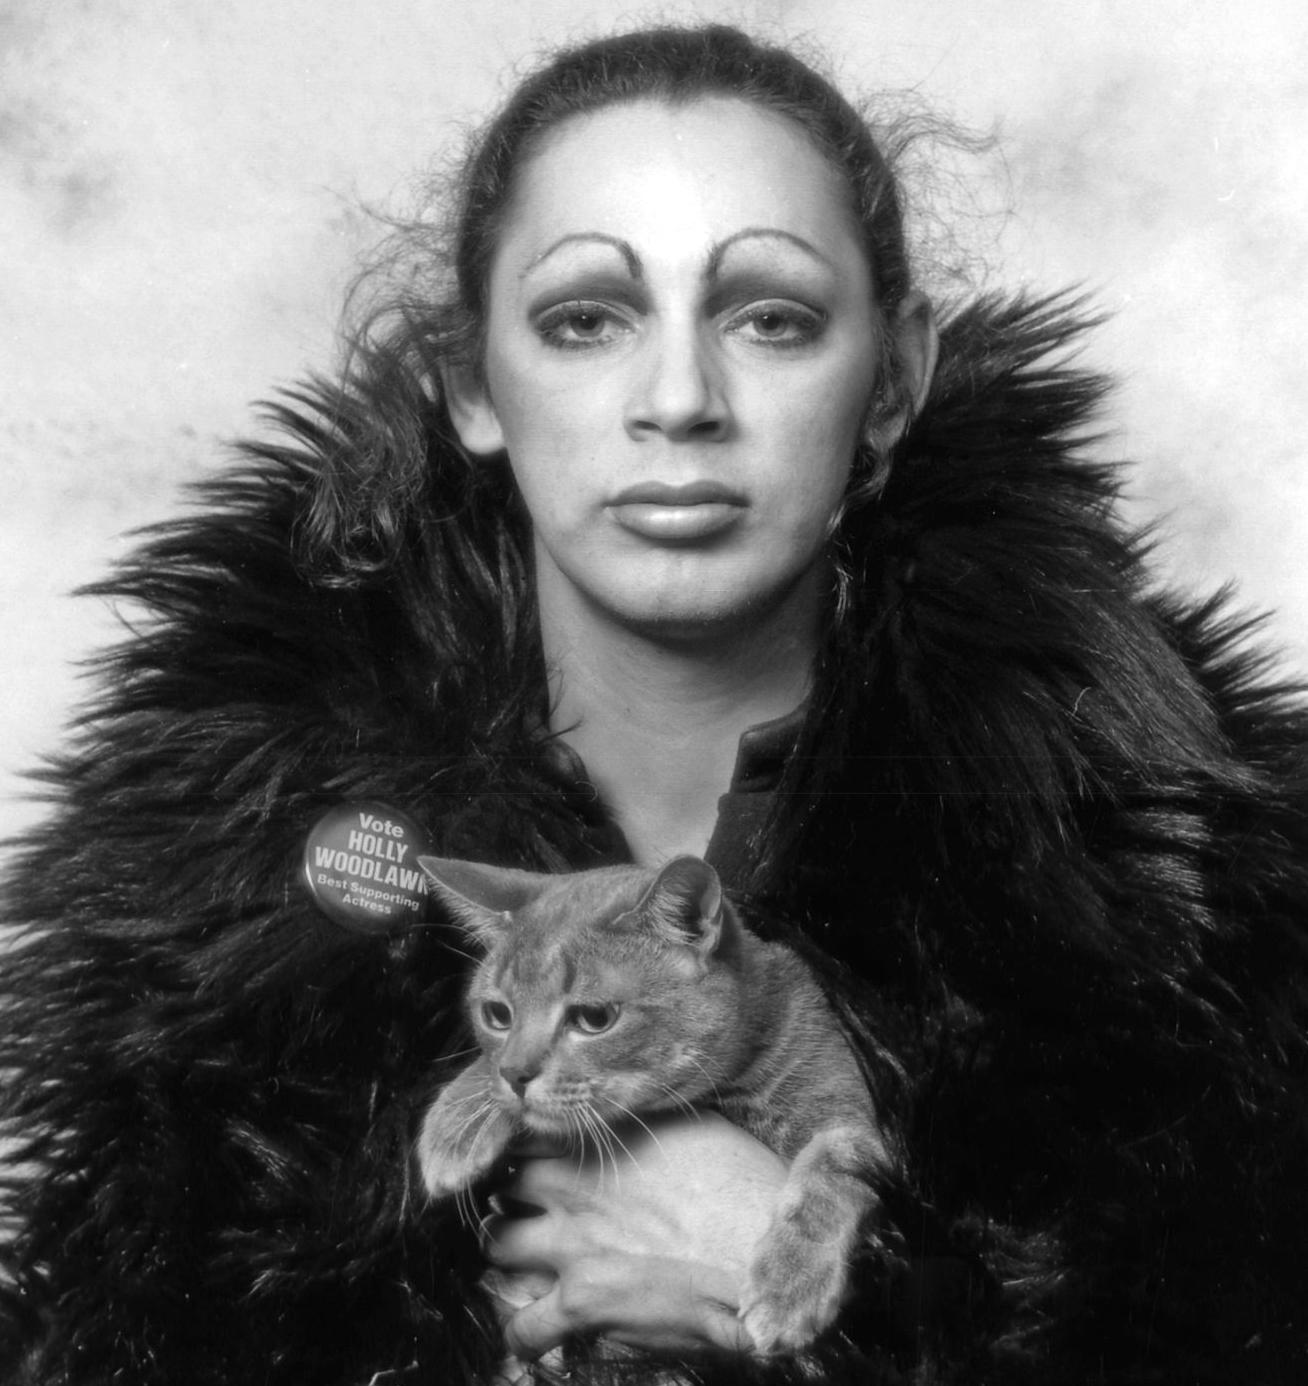 Warhol Superstar Holly Woodlawn with Jack Mitchell's studio cat 'Nik' (named for his favorite camera Nikon), 1971. 13 x 19” archival pigment print. (Photograph © Jack Mitchell - All rights reserved.)

Comes directly from the Jack Mitchell Archives. 